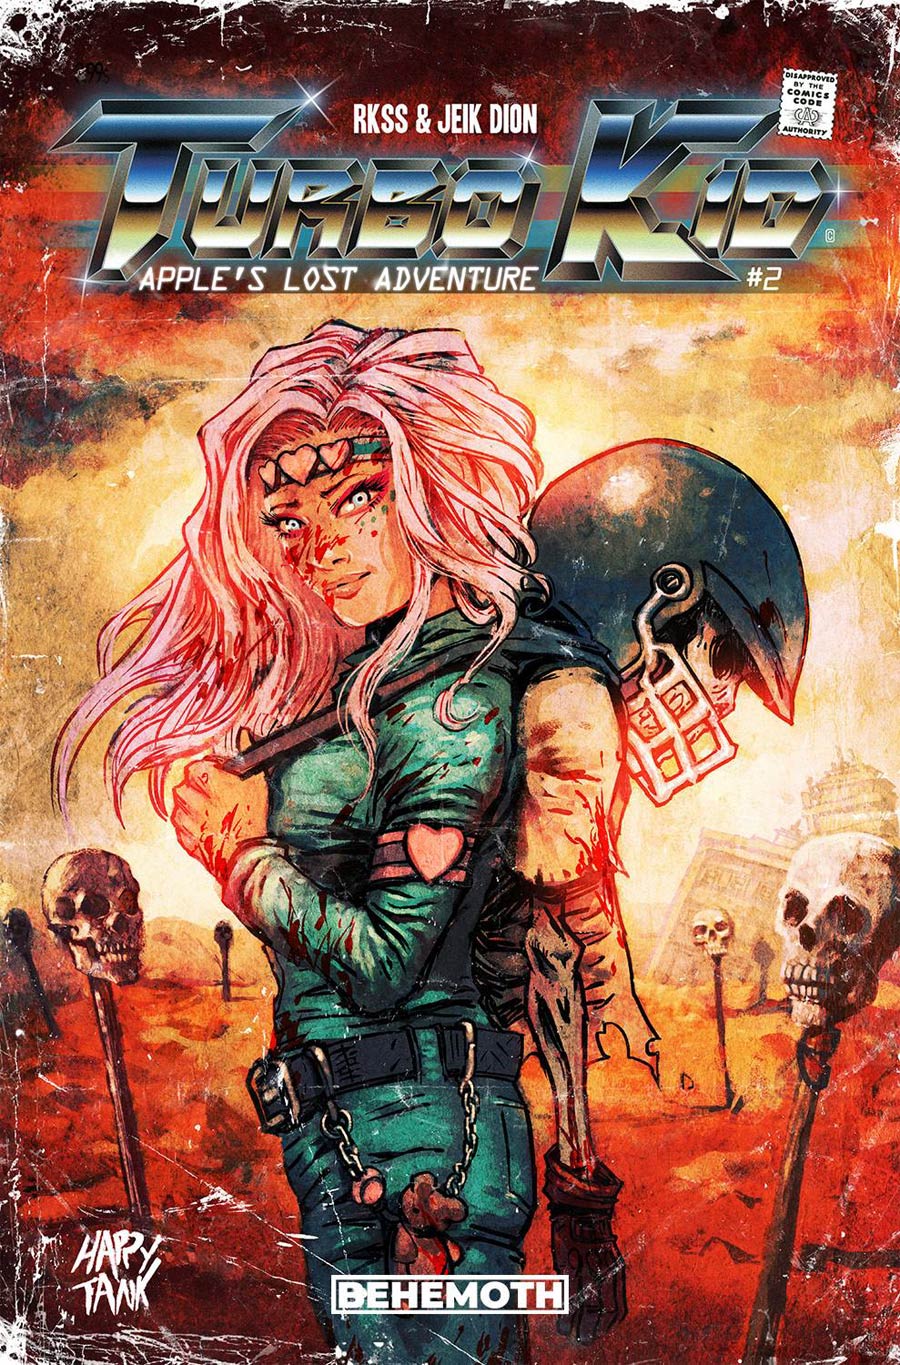 Turbo Kid Apples Lost Adventure #2 Cover A Regular Jeik Dion Cover